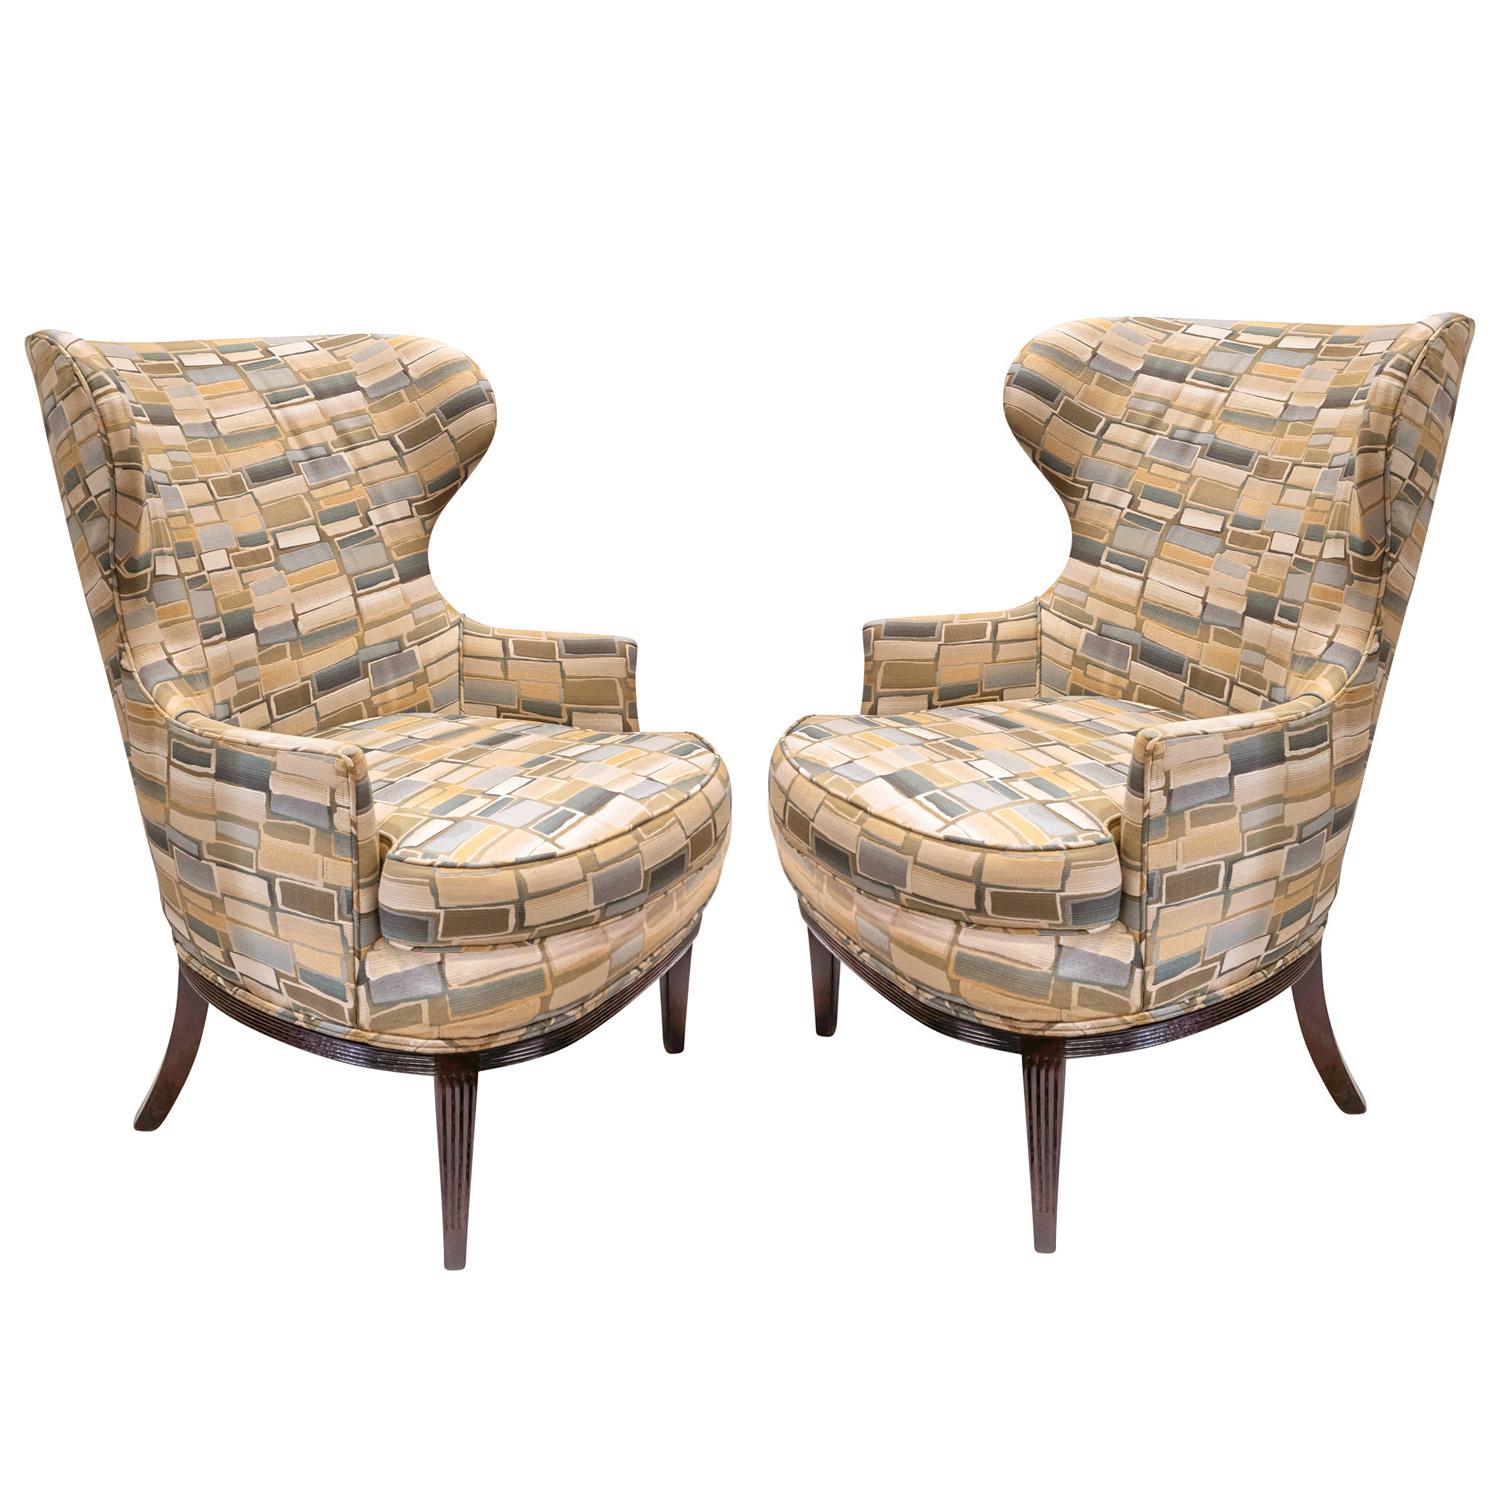 Pair of stylish wingback chairs with fluted wood bases in the style of Paolo Buffa, Italian 1950's.  These chairs are both beautiful and comfortable. Bases have been newly refinished.  These were recently reupholstered.